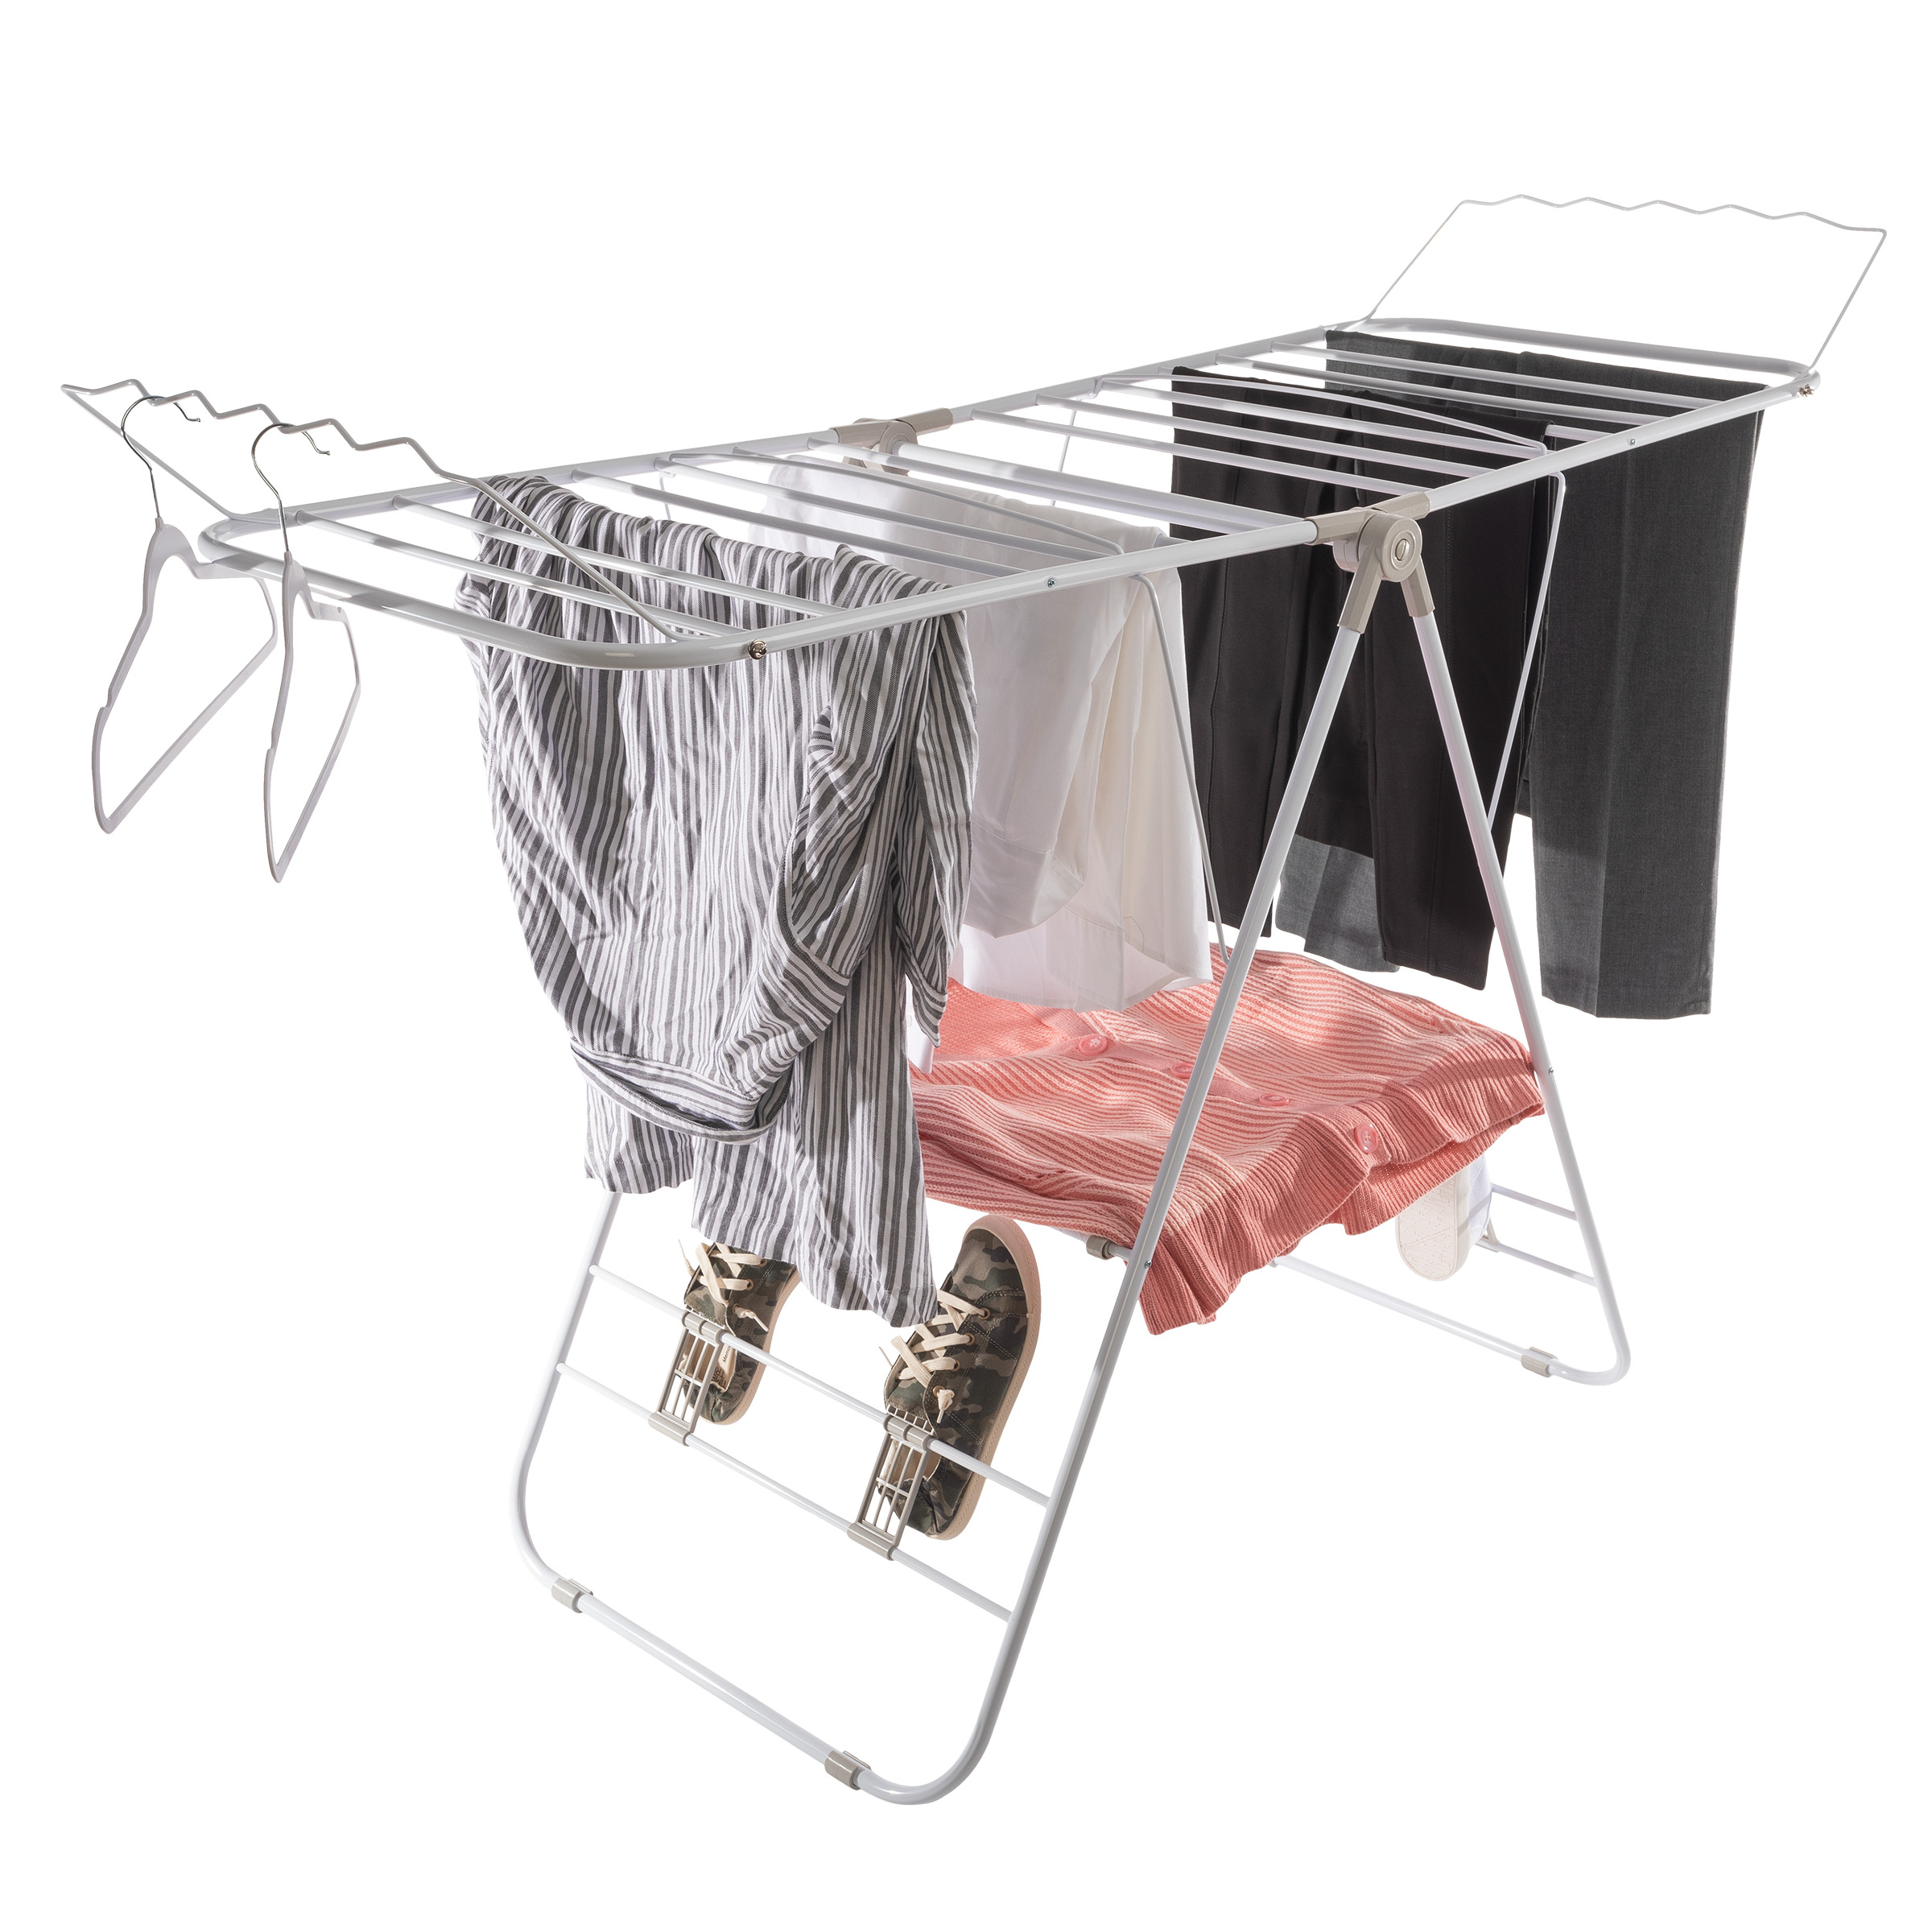 Clothes Drying Rack - Indoor/Outdoor Portable Laundry Rack For Clothing, Towels, Shoes And More - Collapsible Clothes Stand By Everyday Home